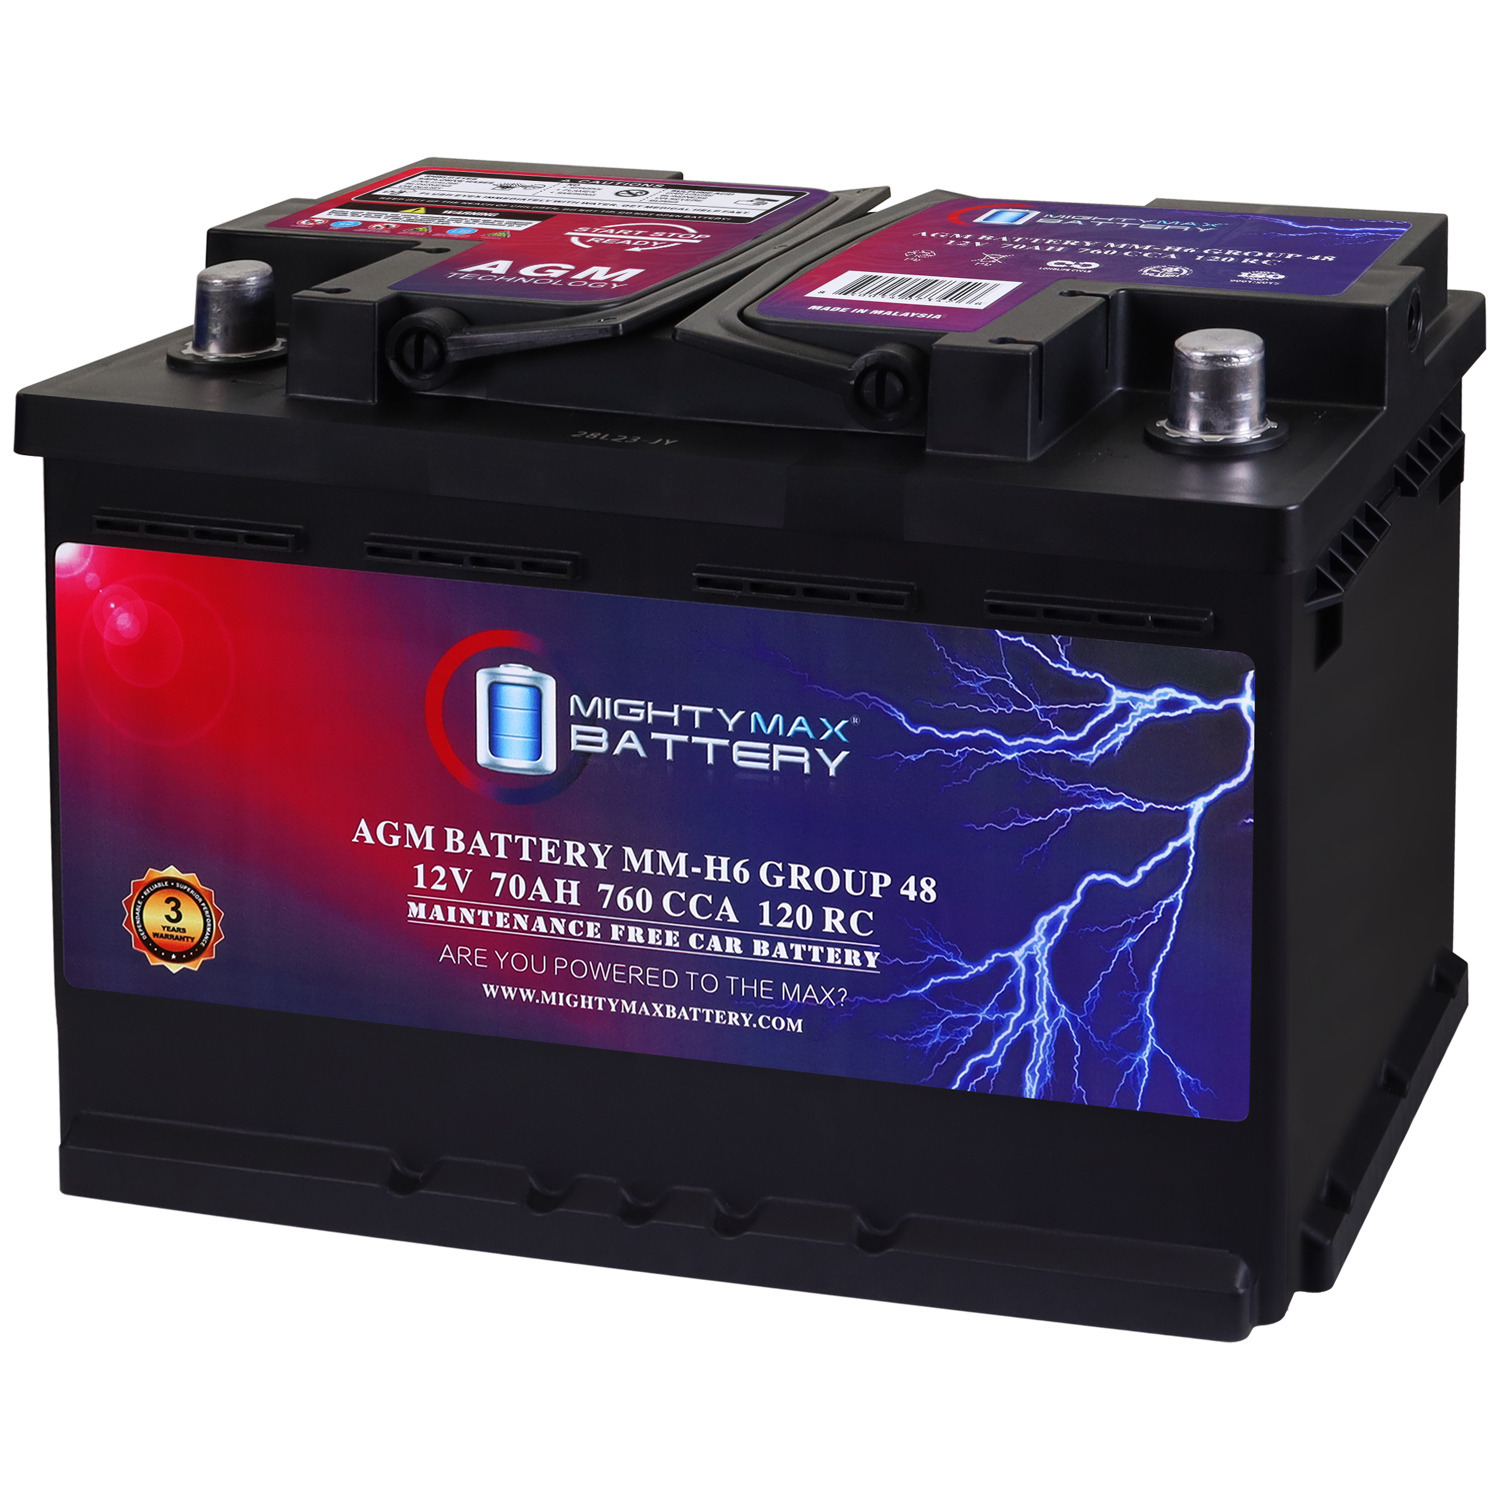 MM-H6 Group 48 12V 70AH 120RC 760CCA Replacement Battery Compatible with Audi Allroad 13-15